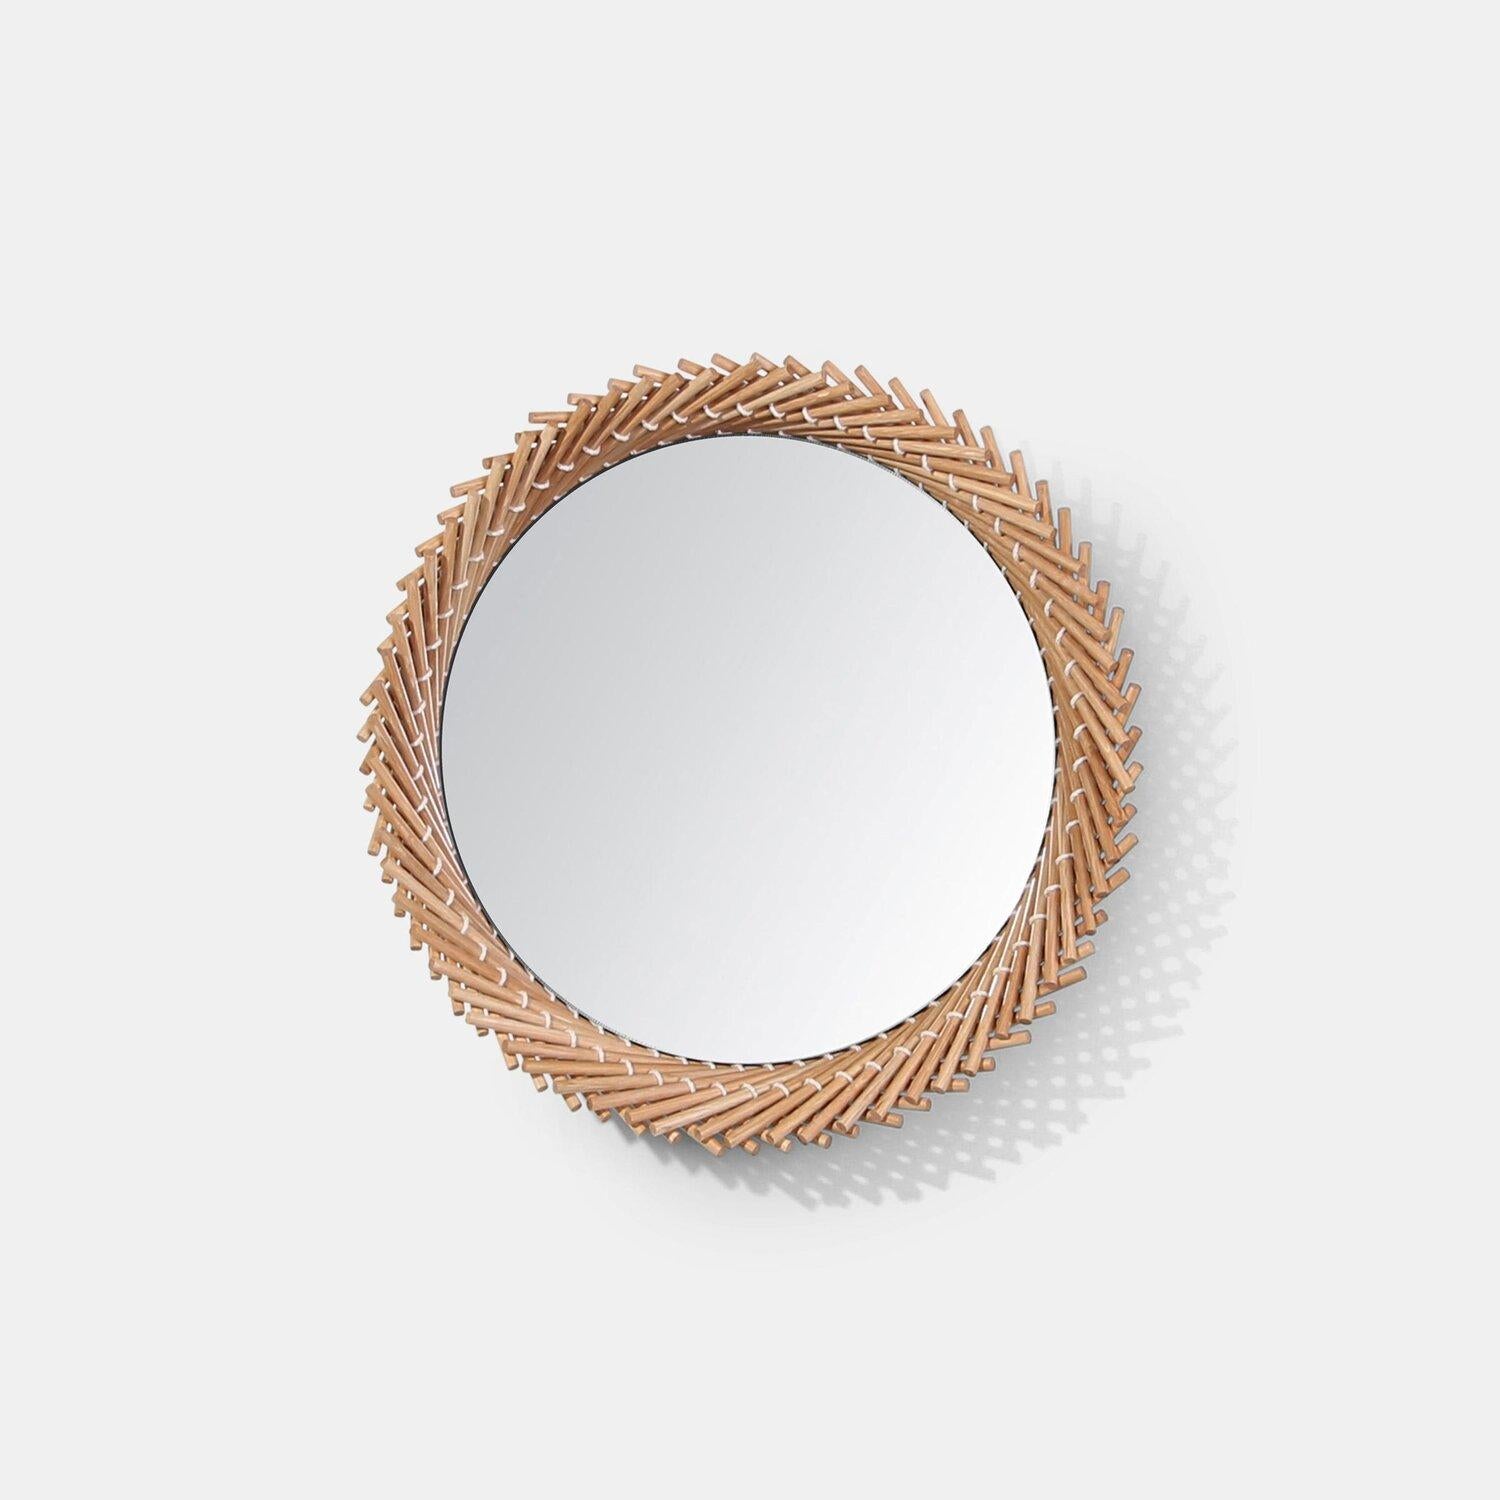 The Mooda Mirror is composed of a set of dowels stitched together to create a beautiful geometric edge around the glass. The mirror in turn reflects the dowels along its circumference, completing the traditional form of the Mooda.   Available in two